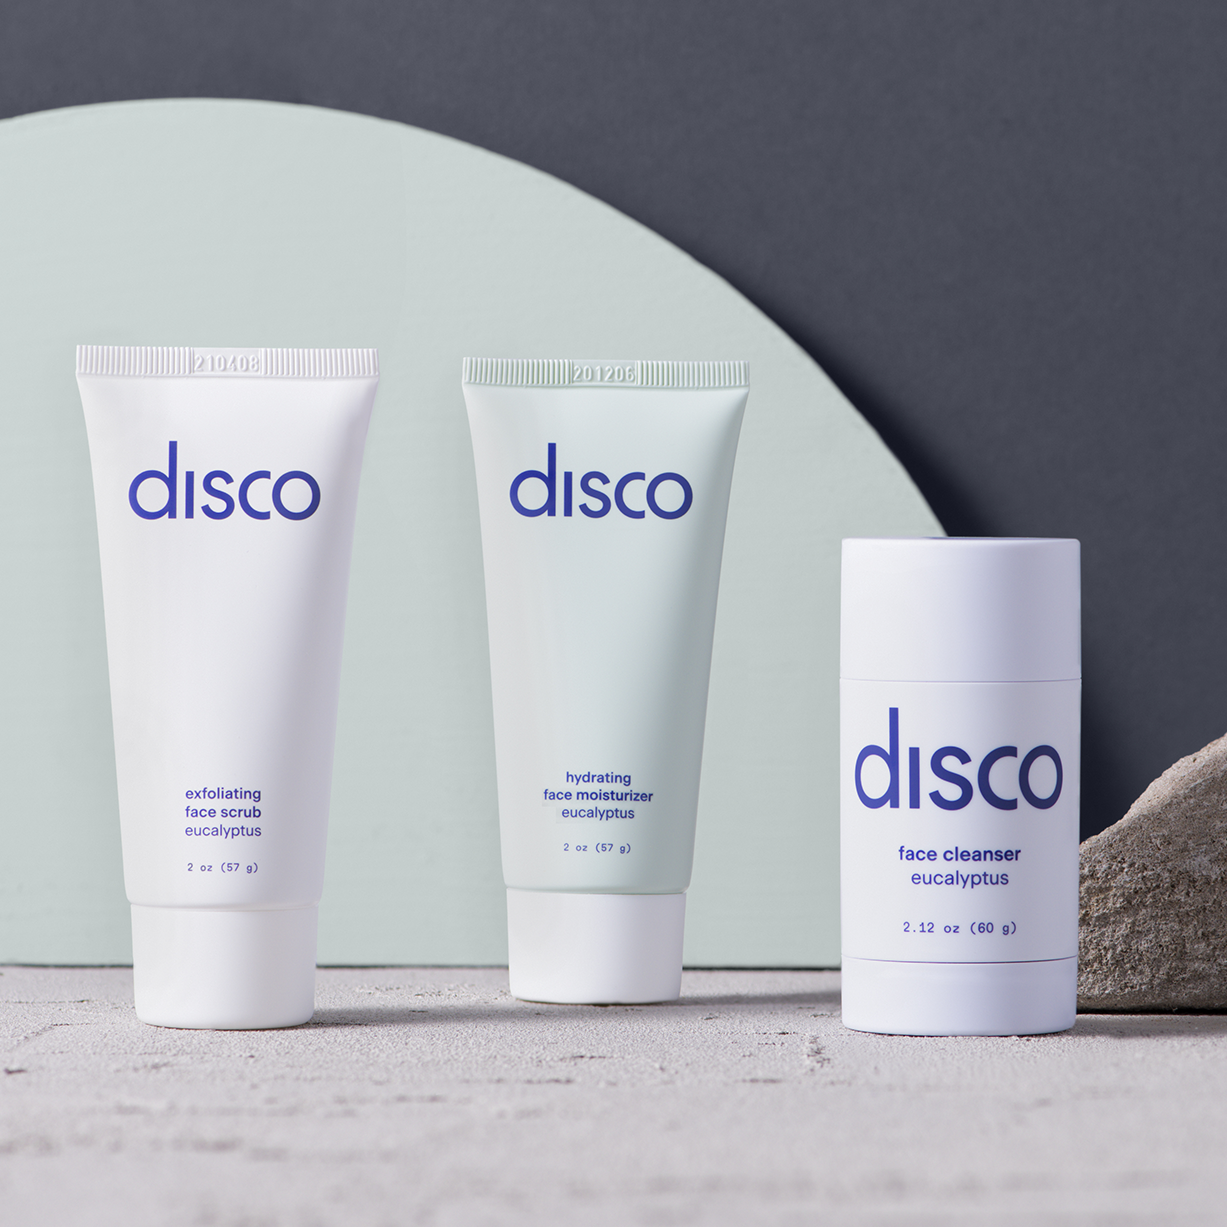 the Disco starter set with a face scrub, face moisturizer, and face cleanser